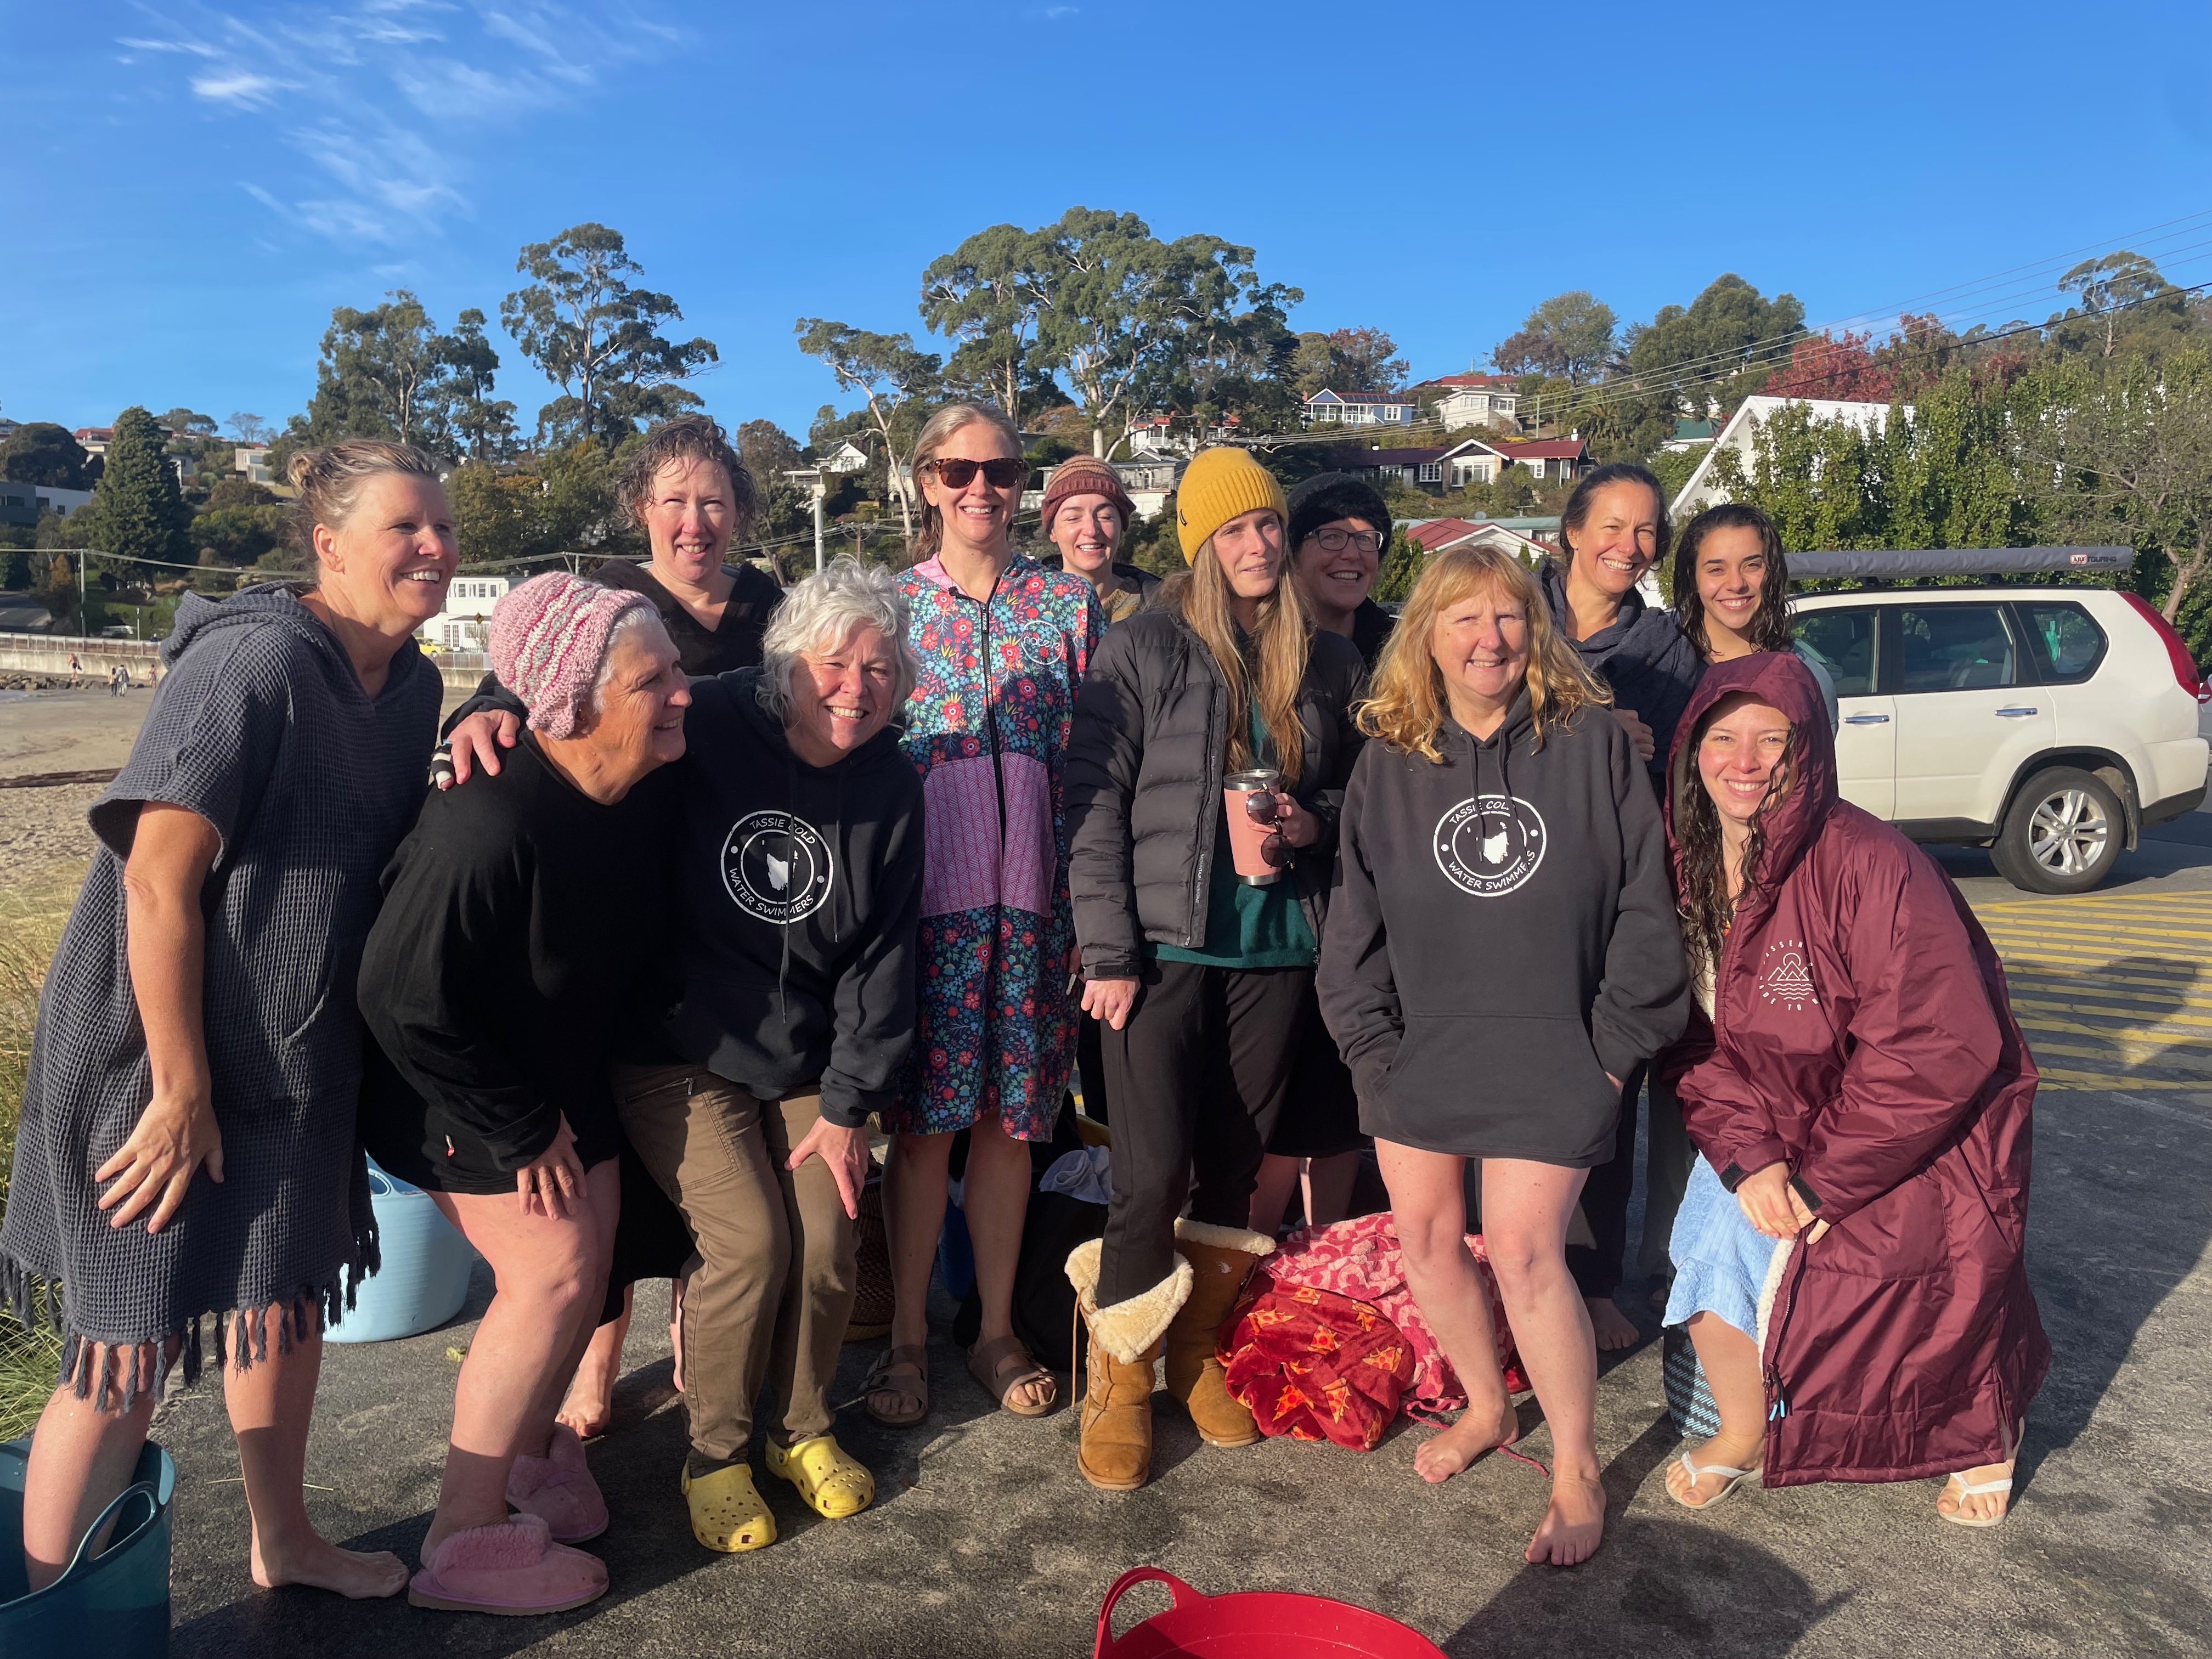 Sea Hags join homelessness support event